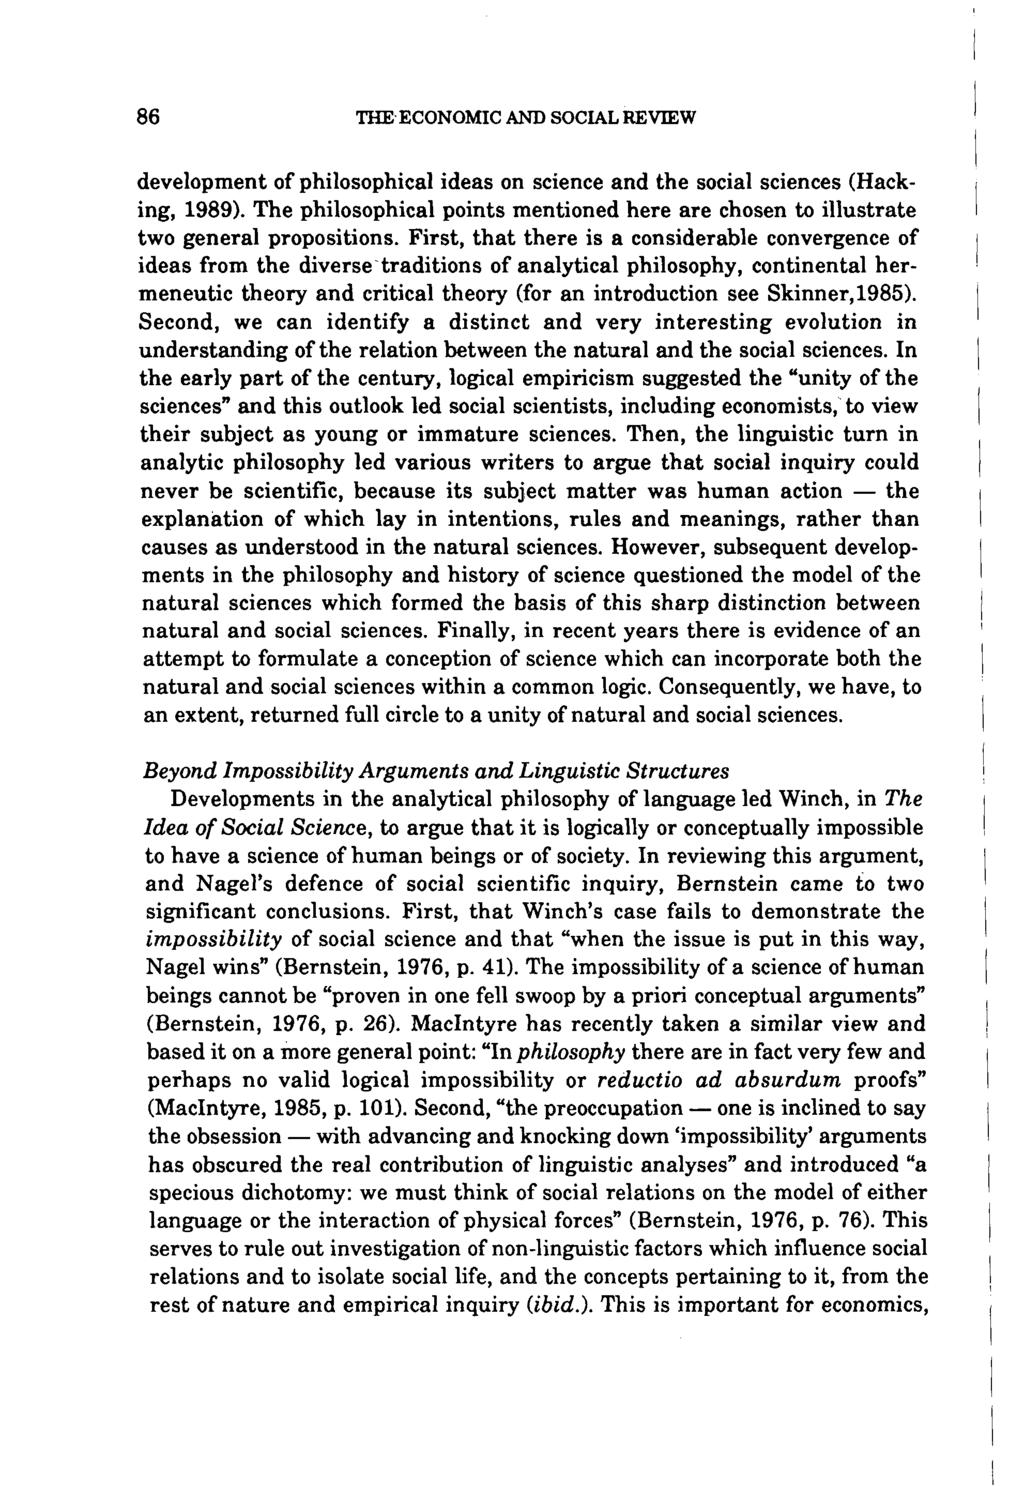 development of philosophical ideas on science and the social sciences (Hacking, 1989). The philosophical points mentioned here are chosen to illustrate two general propositions.